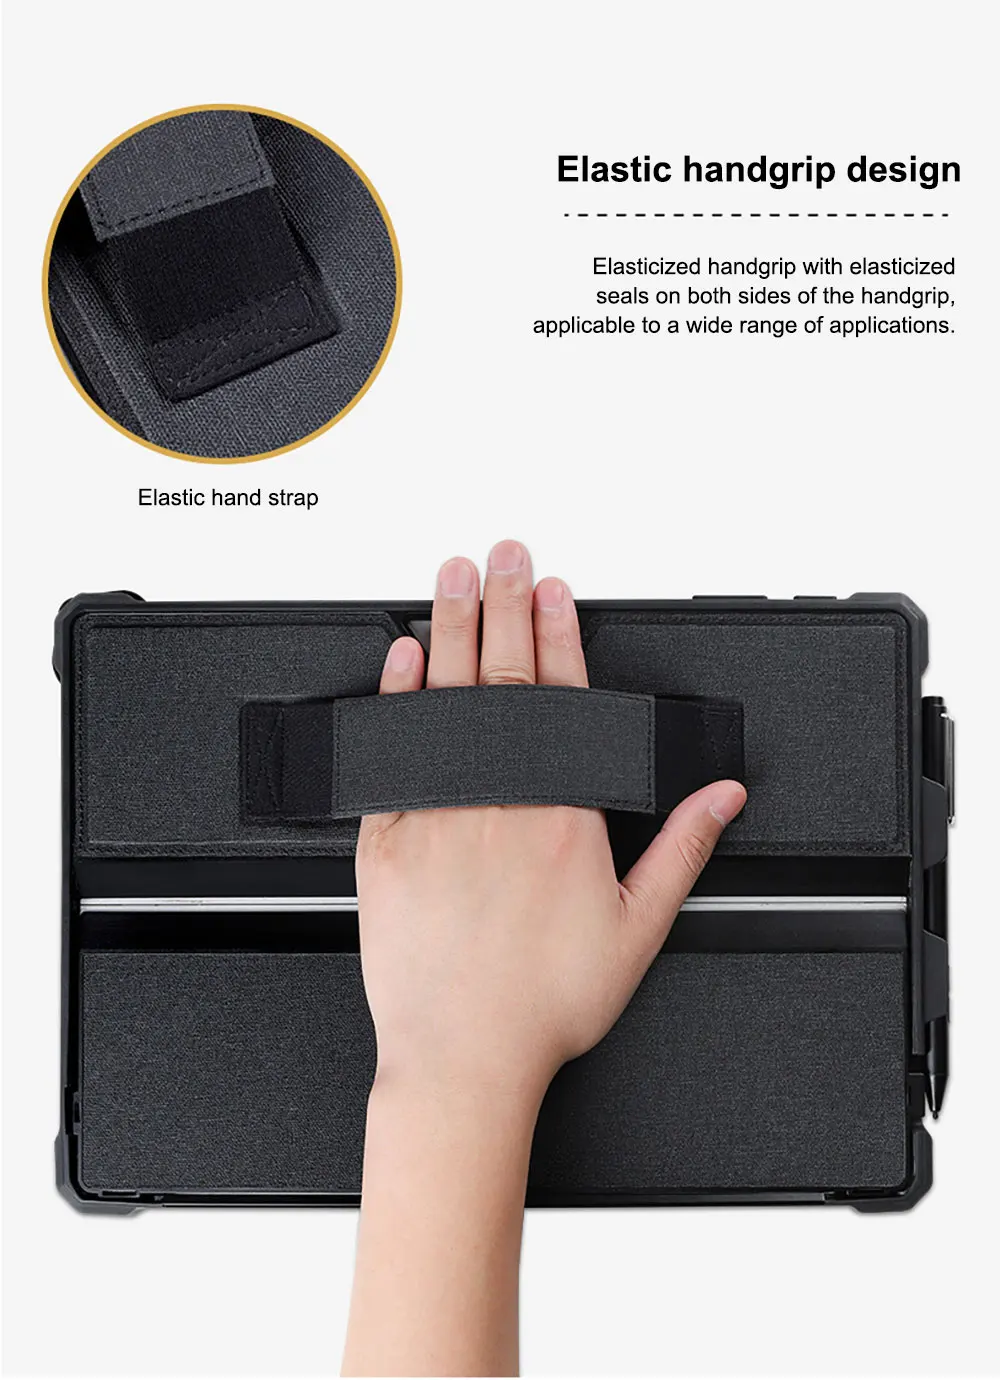 Simple Tablet Cover For Microsoft Surface Pro 7 Plus 6 5 With Hand Grip Strap Holder Shoulder 3In1 Anti Drop Case Pbk212 Laudtec supplier